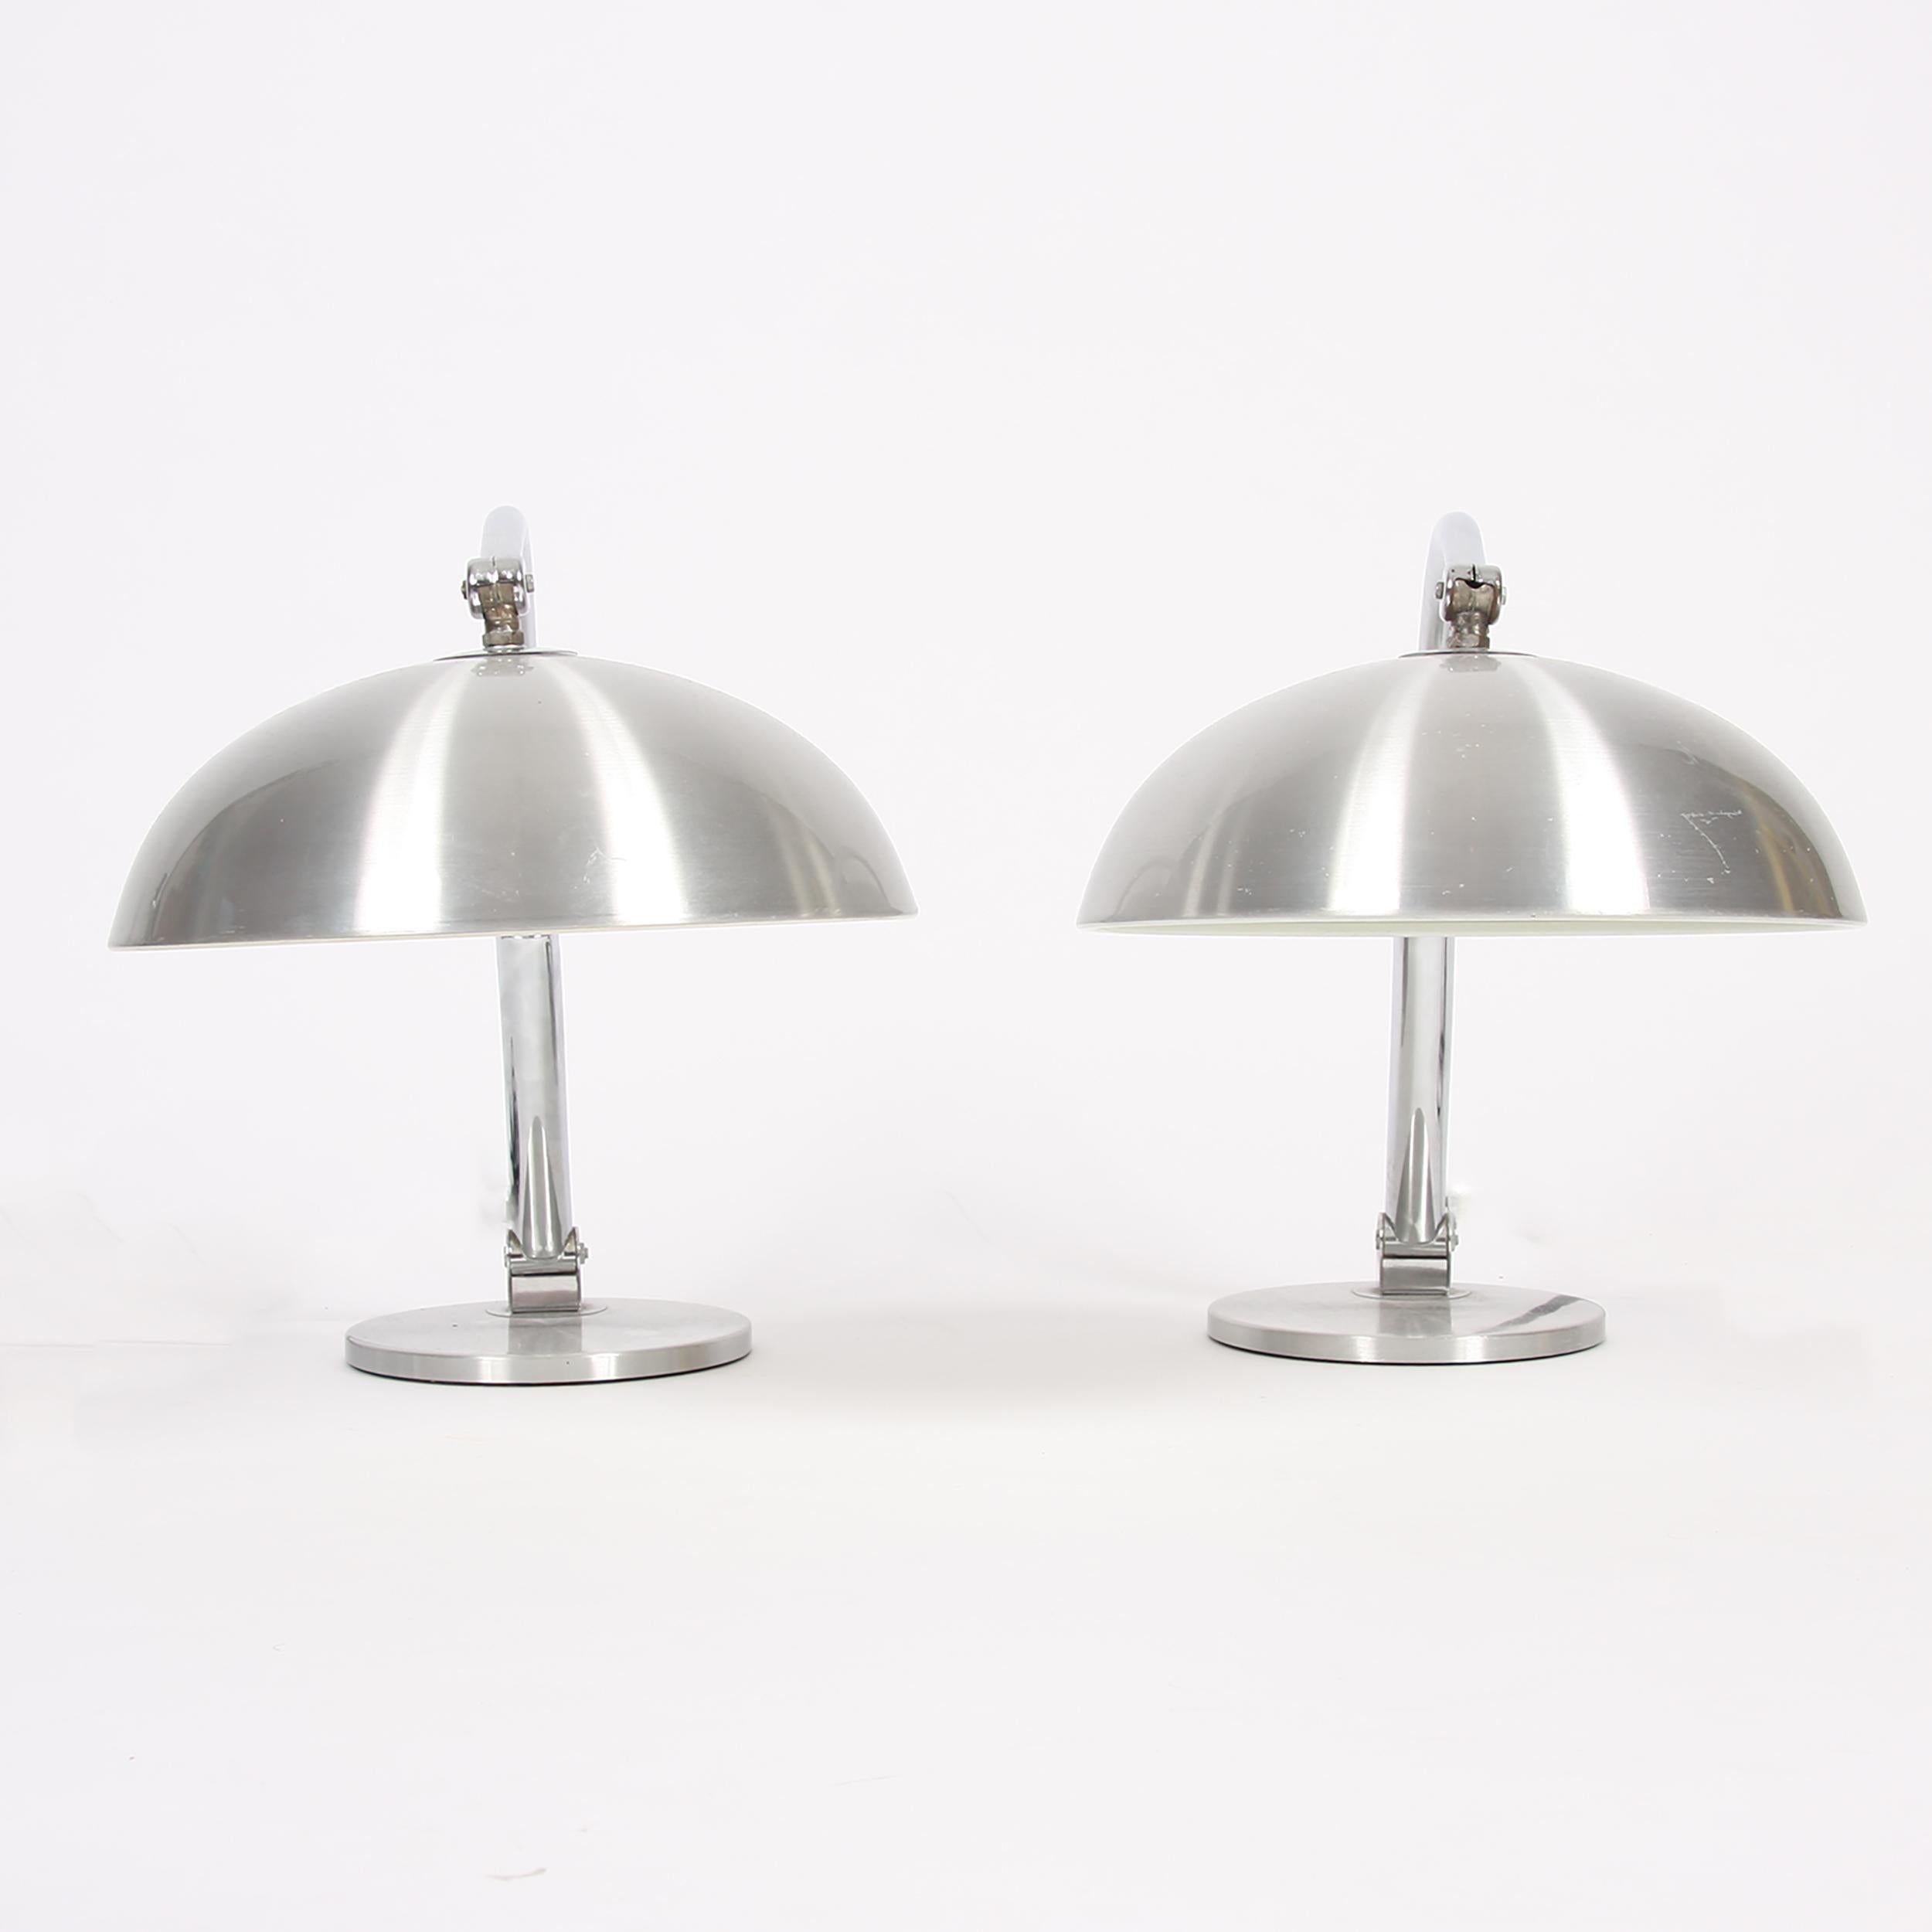 Pair of brushed steel desk lamps, these are fully adjustable. Dutch, made in the 1980s.